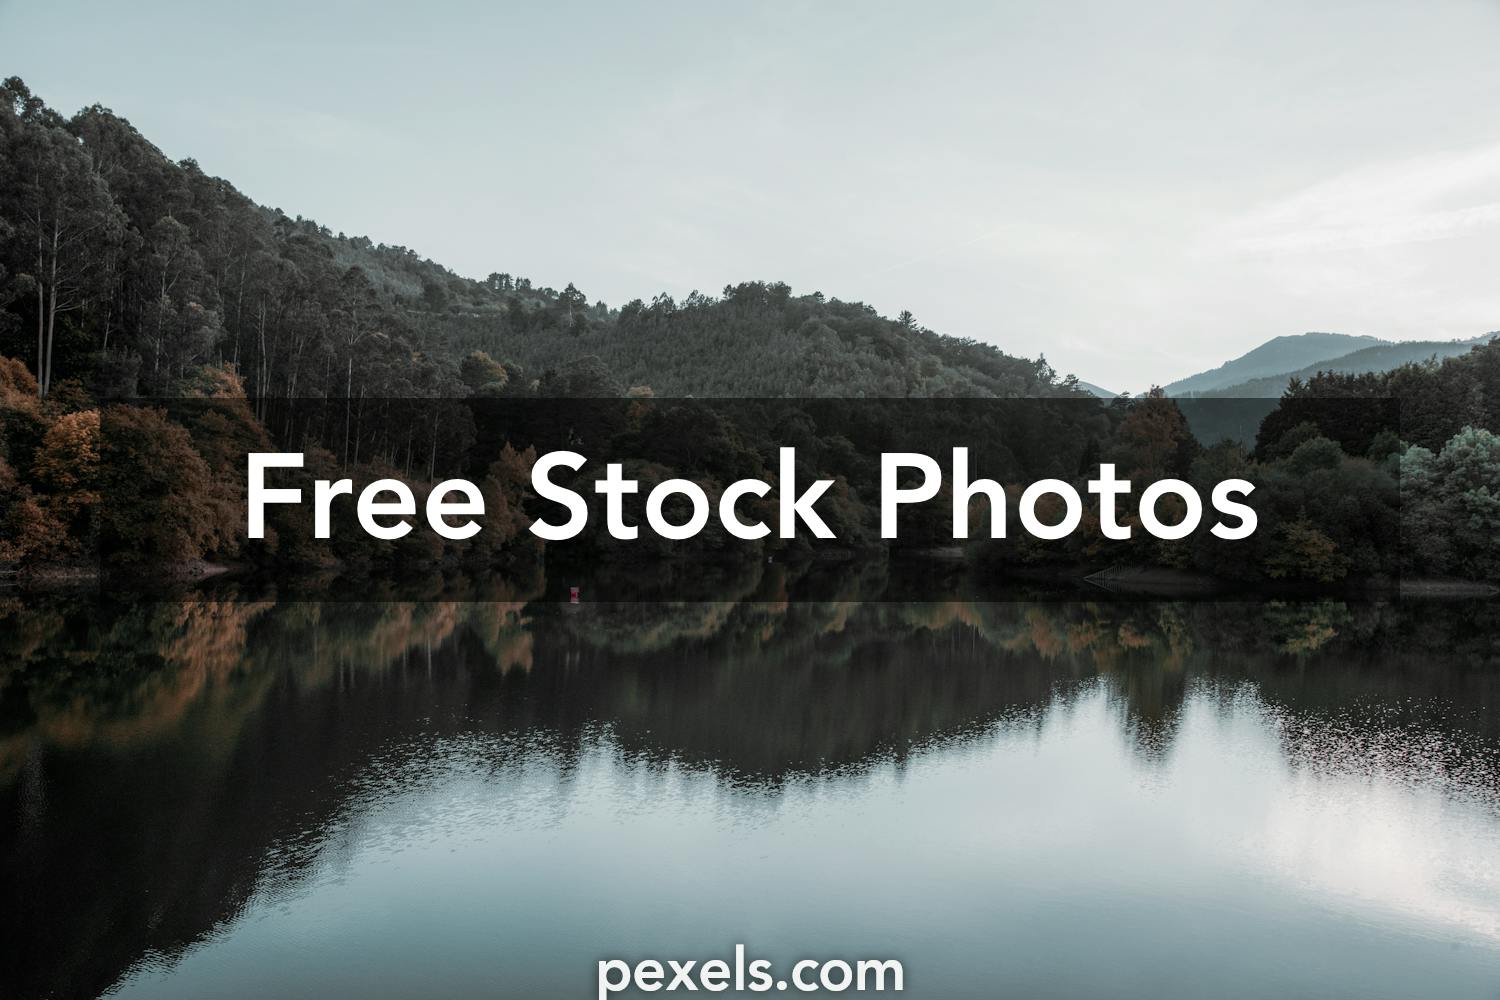 Best Pv Photos · 100% Free Download · Pexels Stock Photos